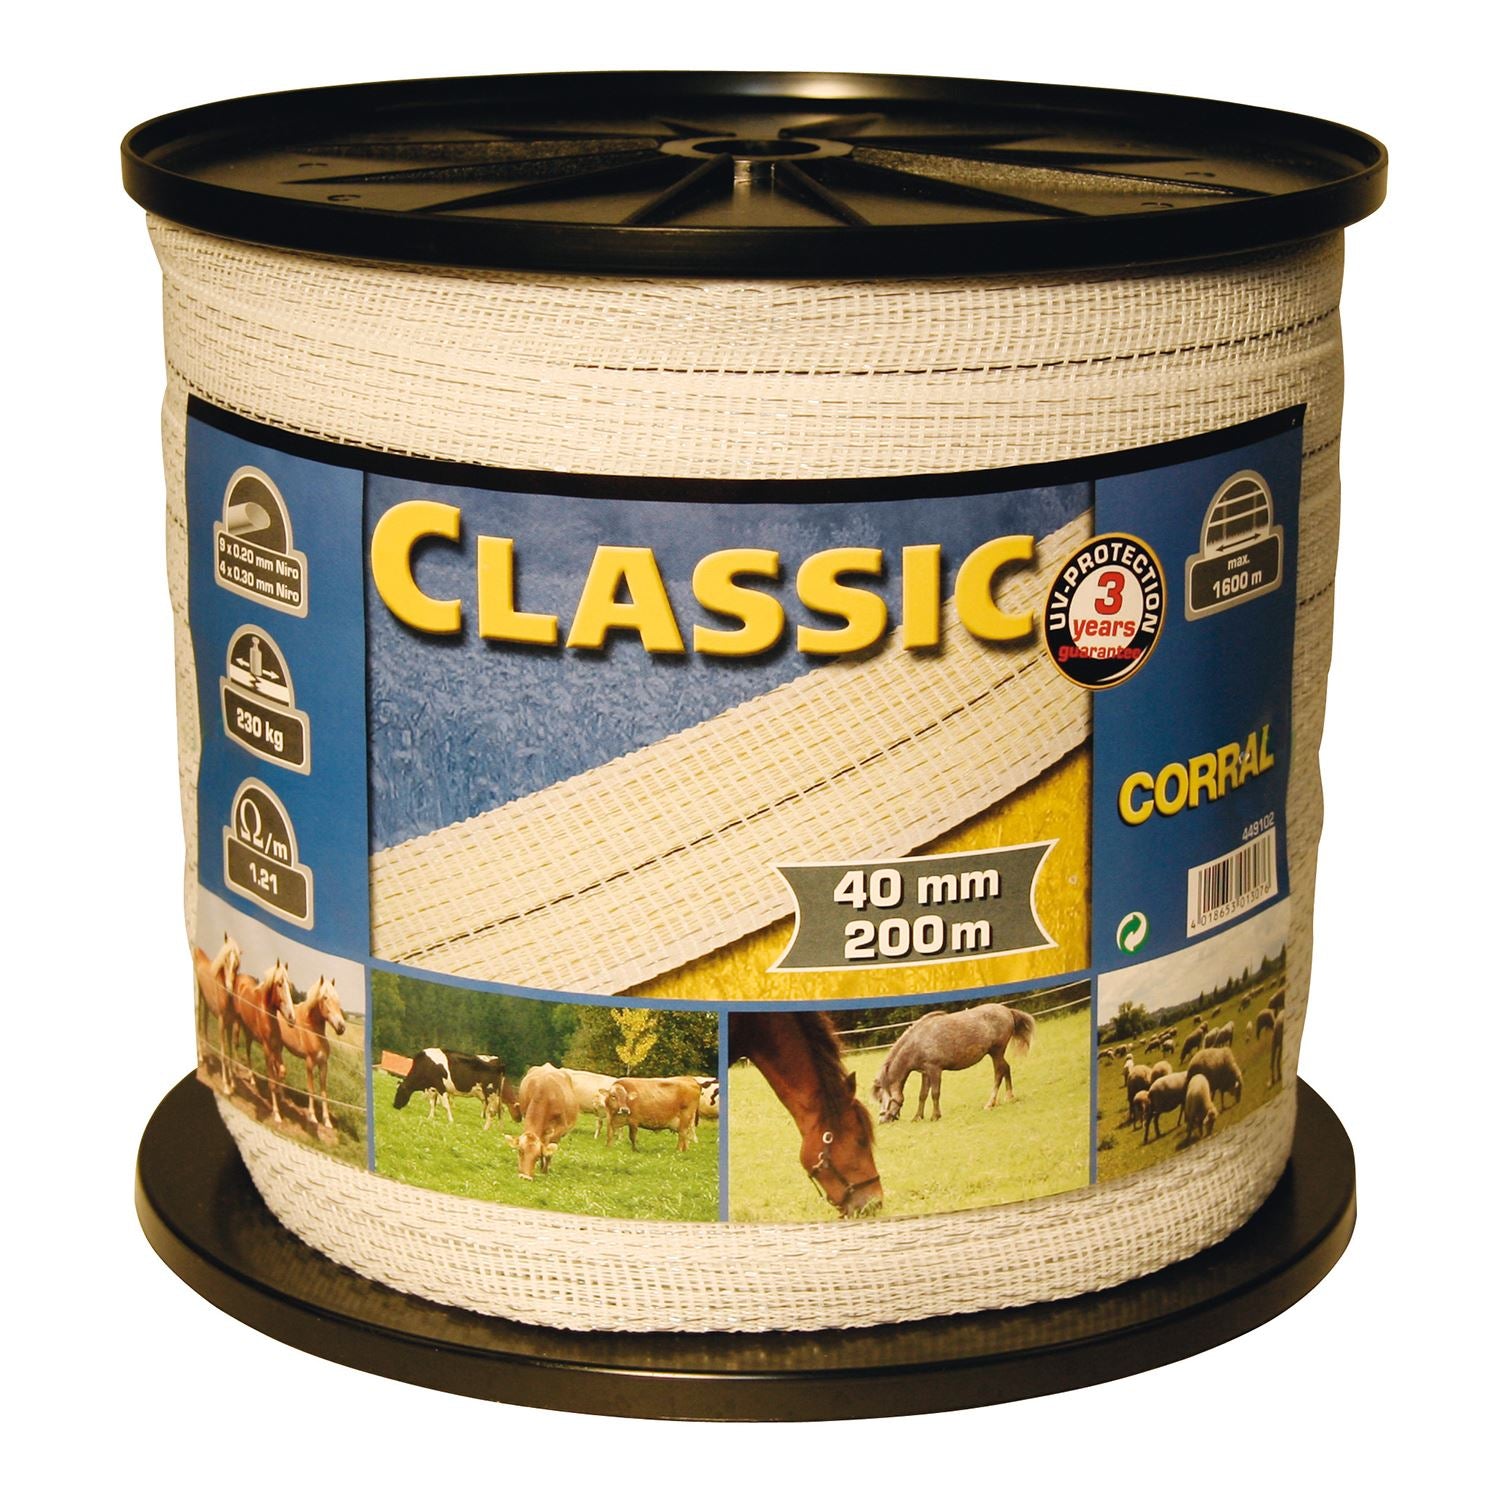 Corral Classic Fencing Tape - Just Horse Riders